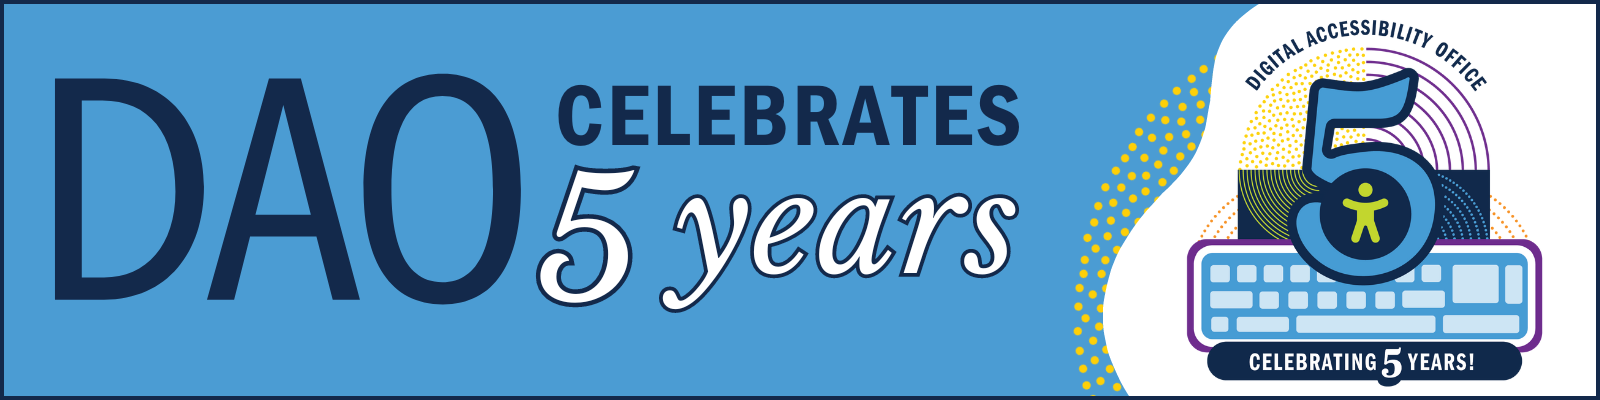 A celebratory graphic of a 5 with an accessibility icon, a keyboard and colorful shapes. Text next to it reads "DAO celebrates 5 years"